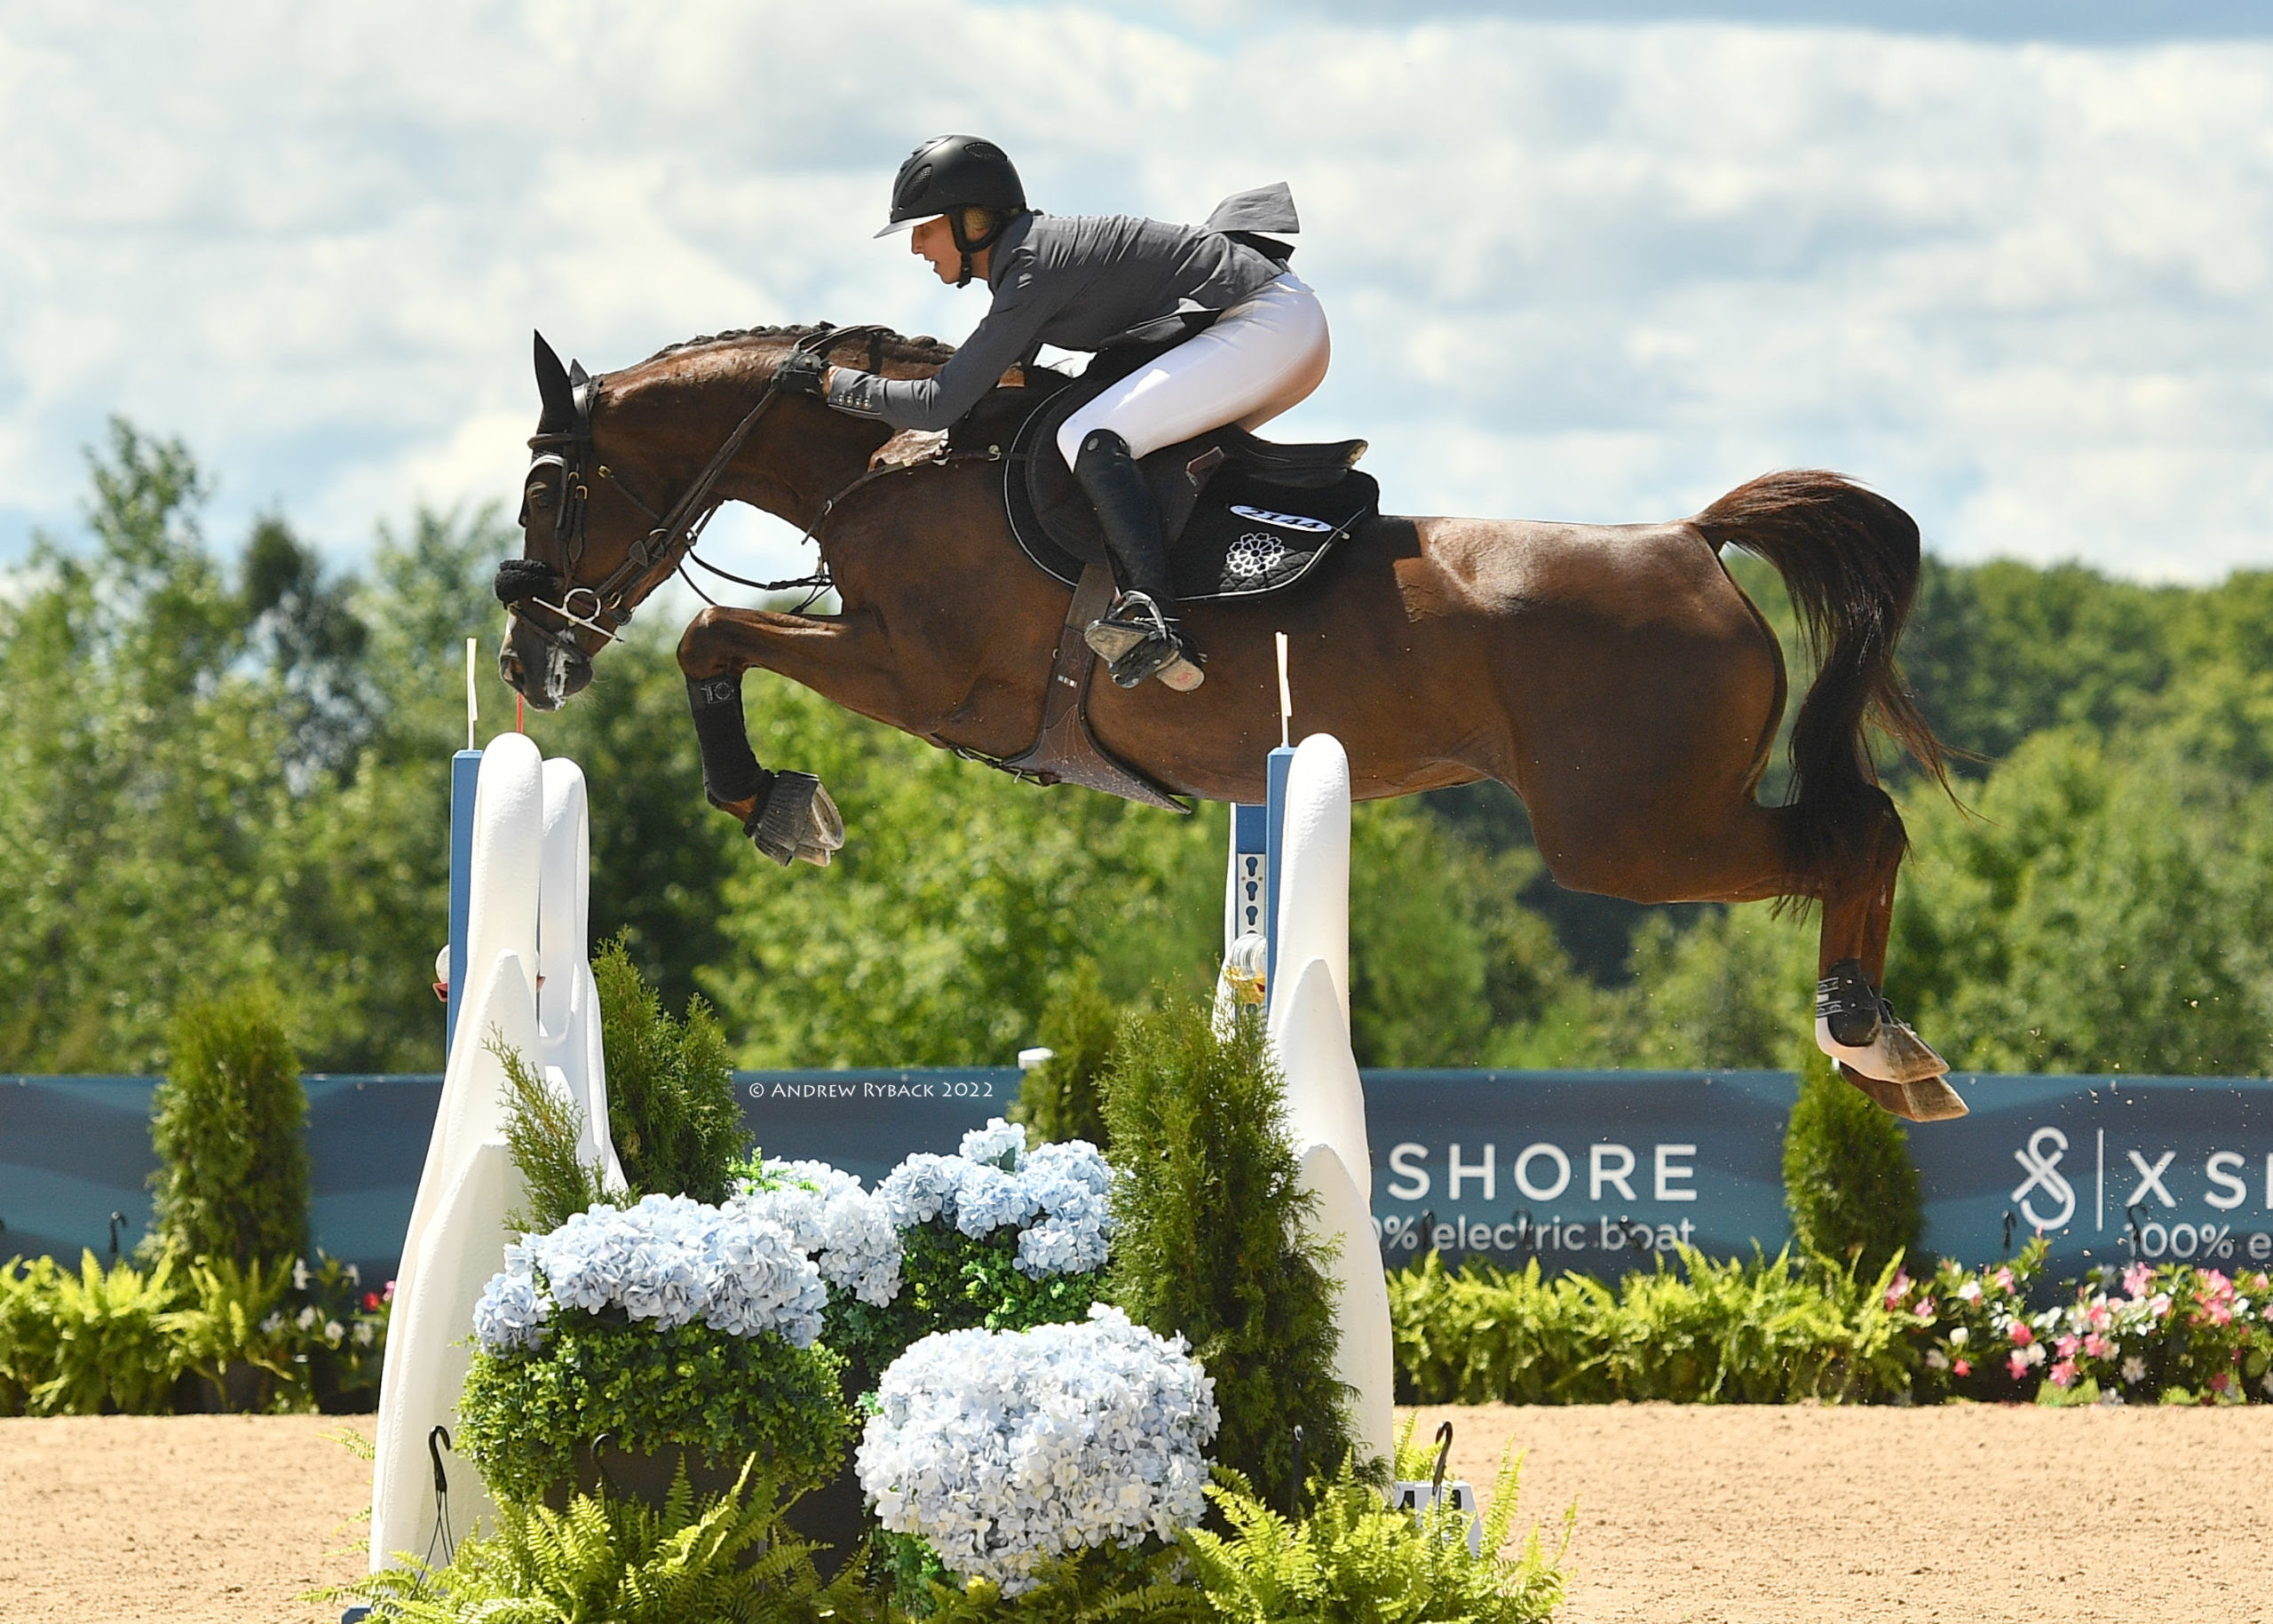 Divine Day for Nathalie Dean at Traverse City Horse Show